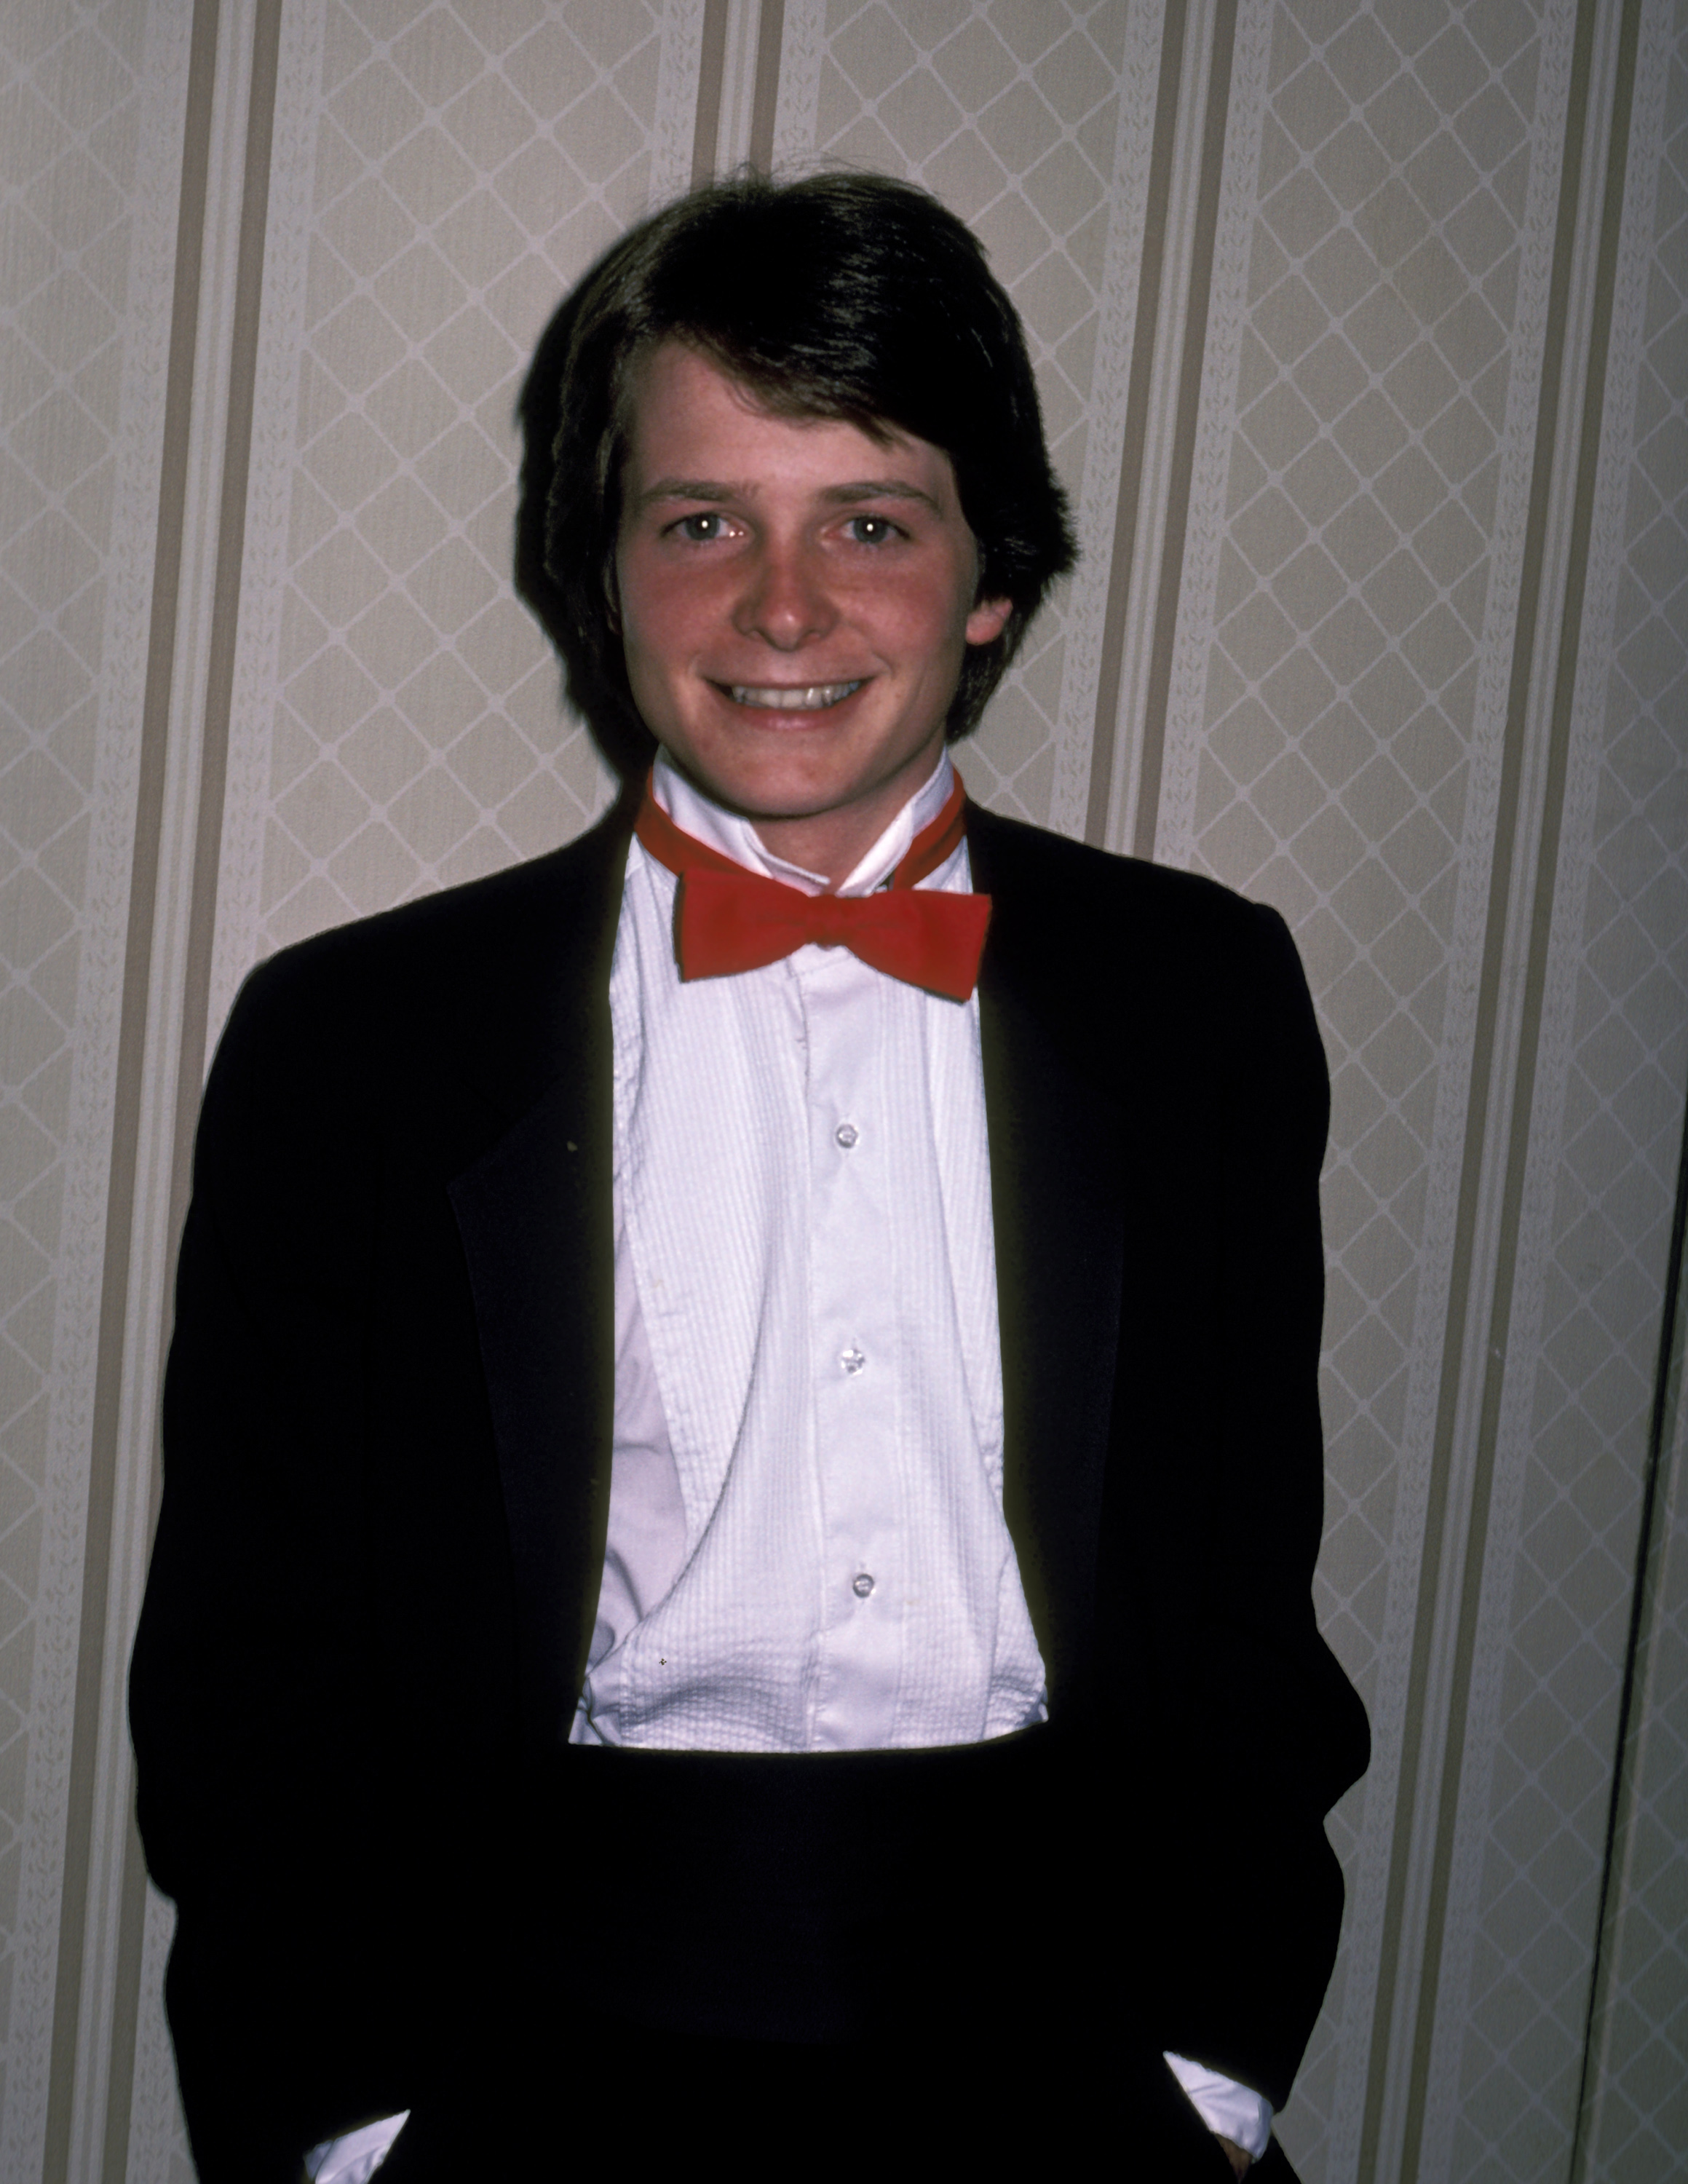 Michael J. Fox on March 15, 1983 | Source: Getty Images